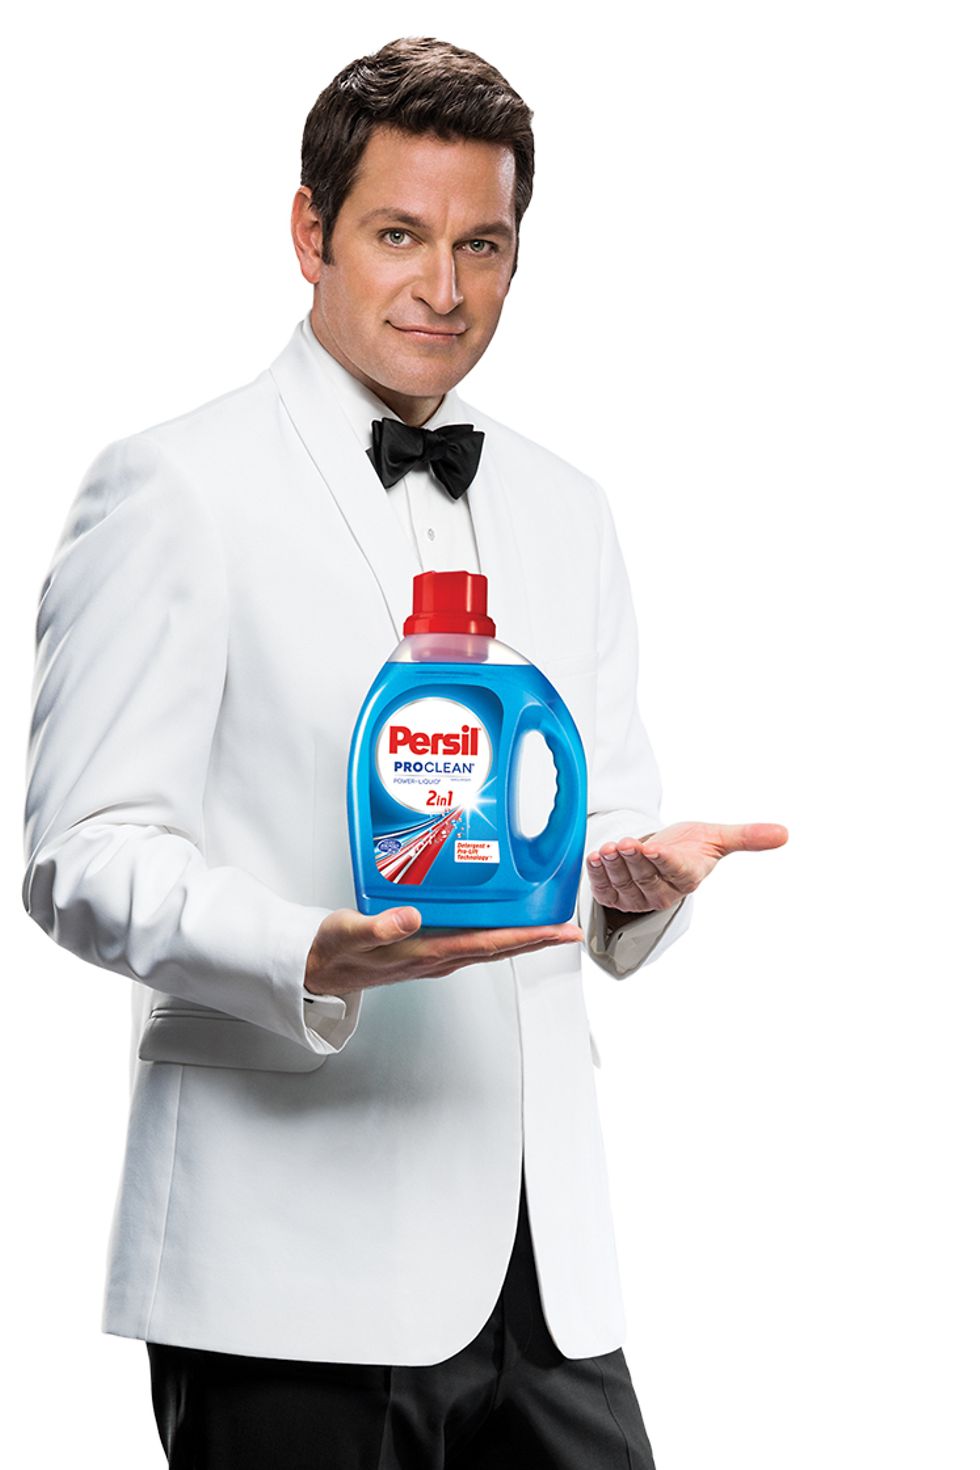 Persil ProClean’s “The Professional”